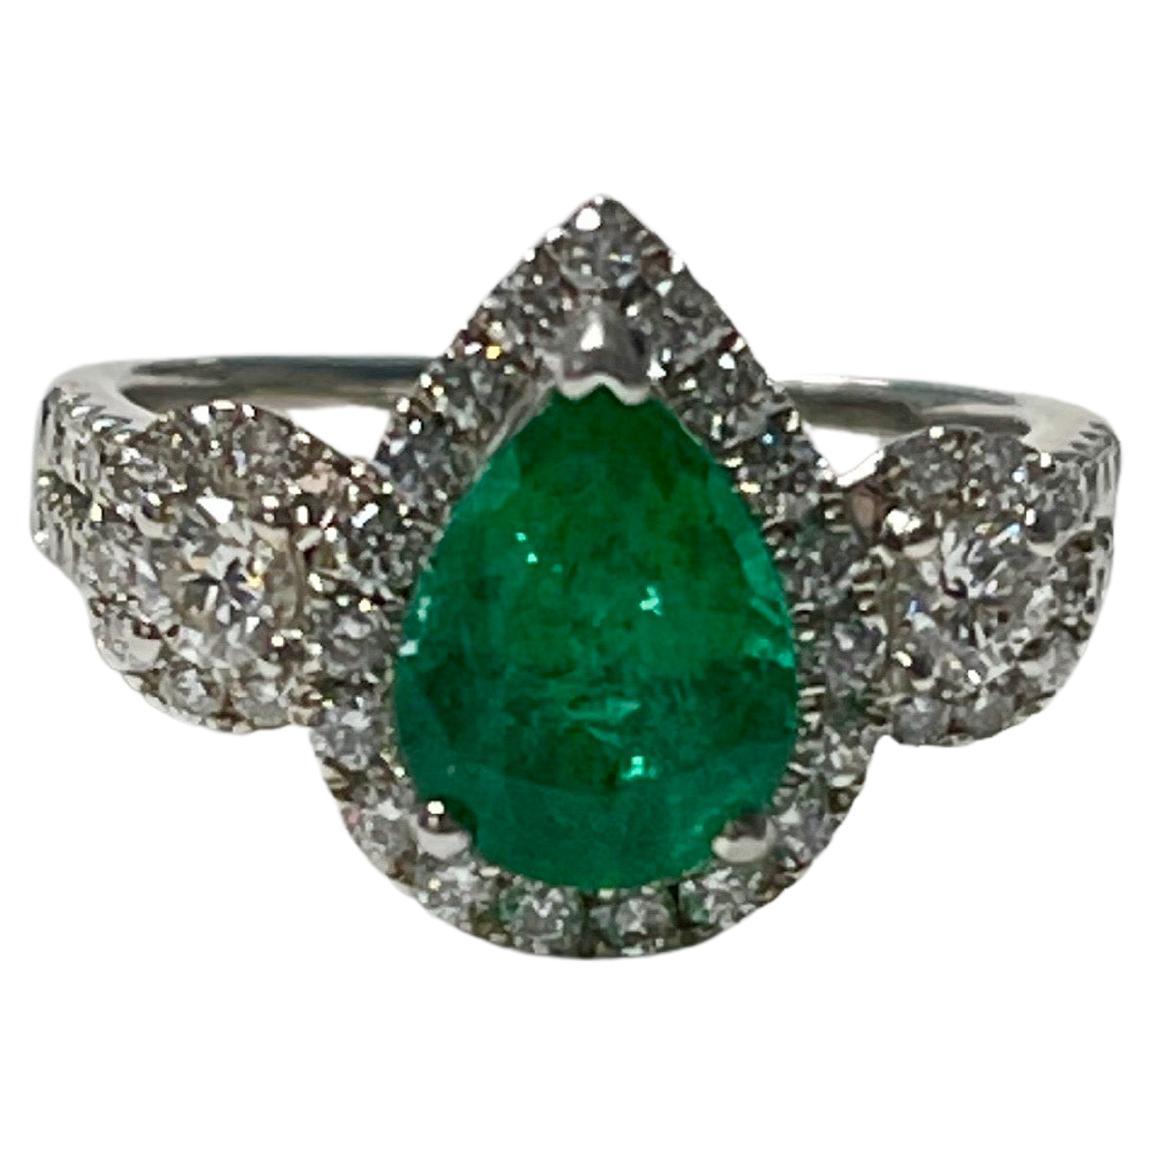 Contemporary 1.75 Carat Pear Shape Emerald and Diamond Ring in 18K White Gold For Sale